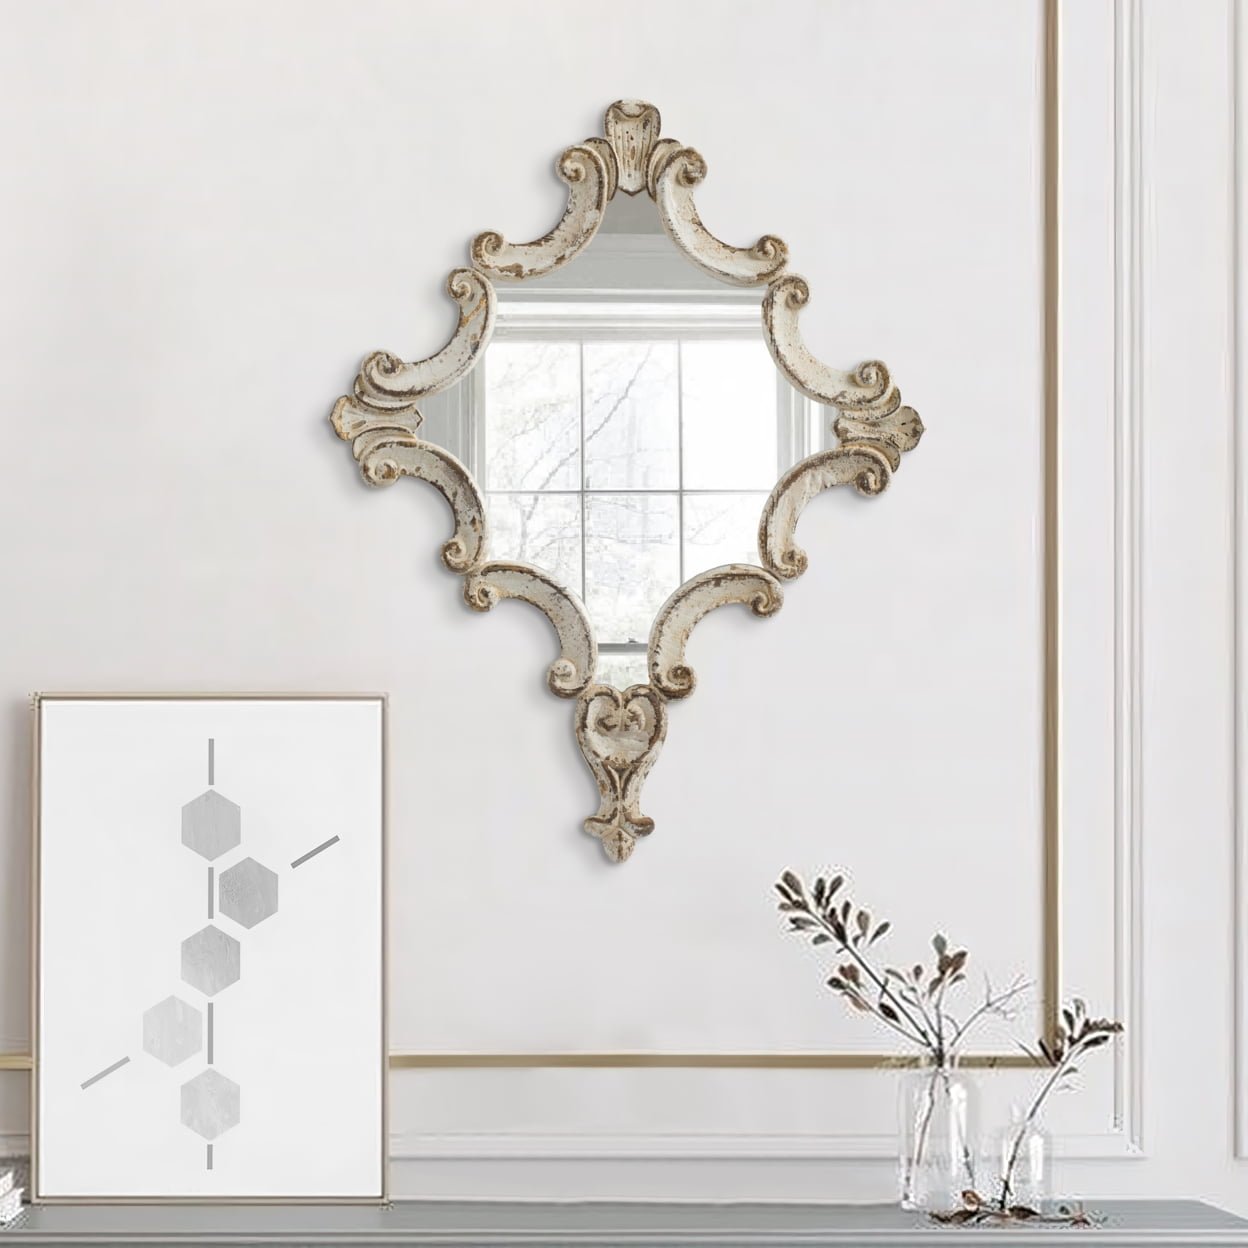 Picture of Benjara BM286109 30 in. Fir Wood Accent Wall Mirror with Carved Ornate Scrollwork, Antique White